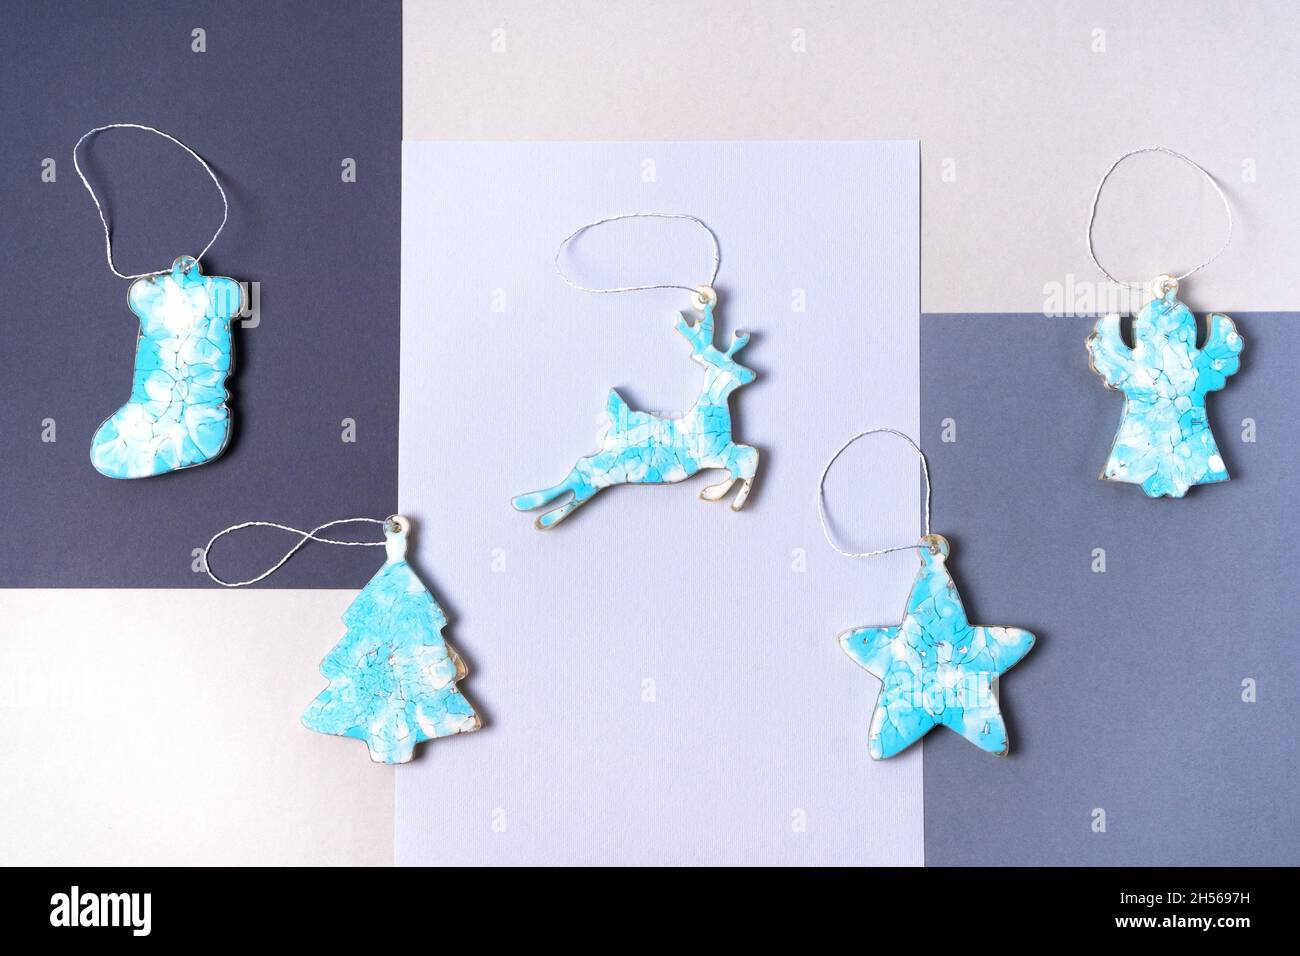 Blue Christmas decorations on a Christmas tree made of epoxy resin on a gray background. Christmas sock, star, deer, angel and tree. Top view Stock Photo